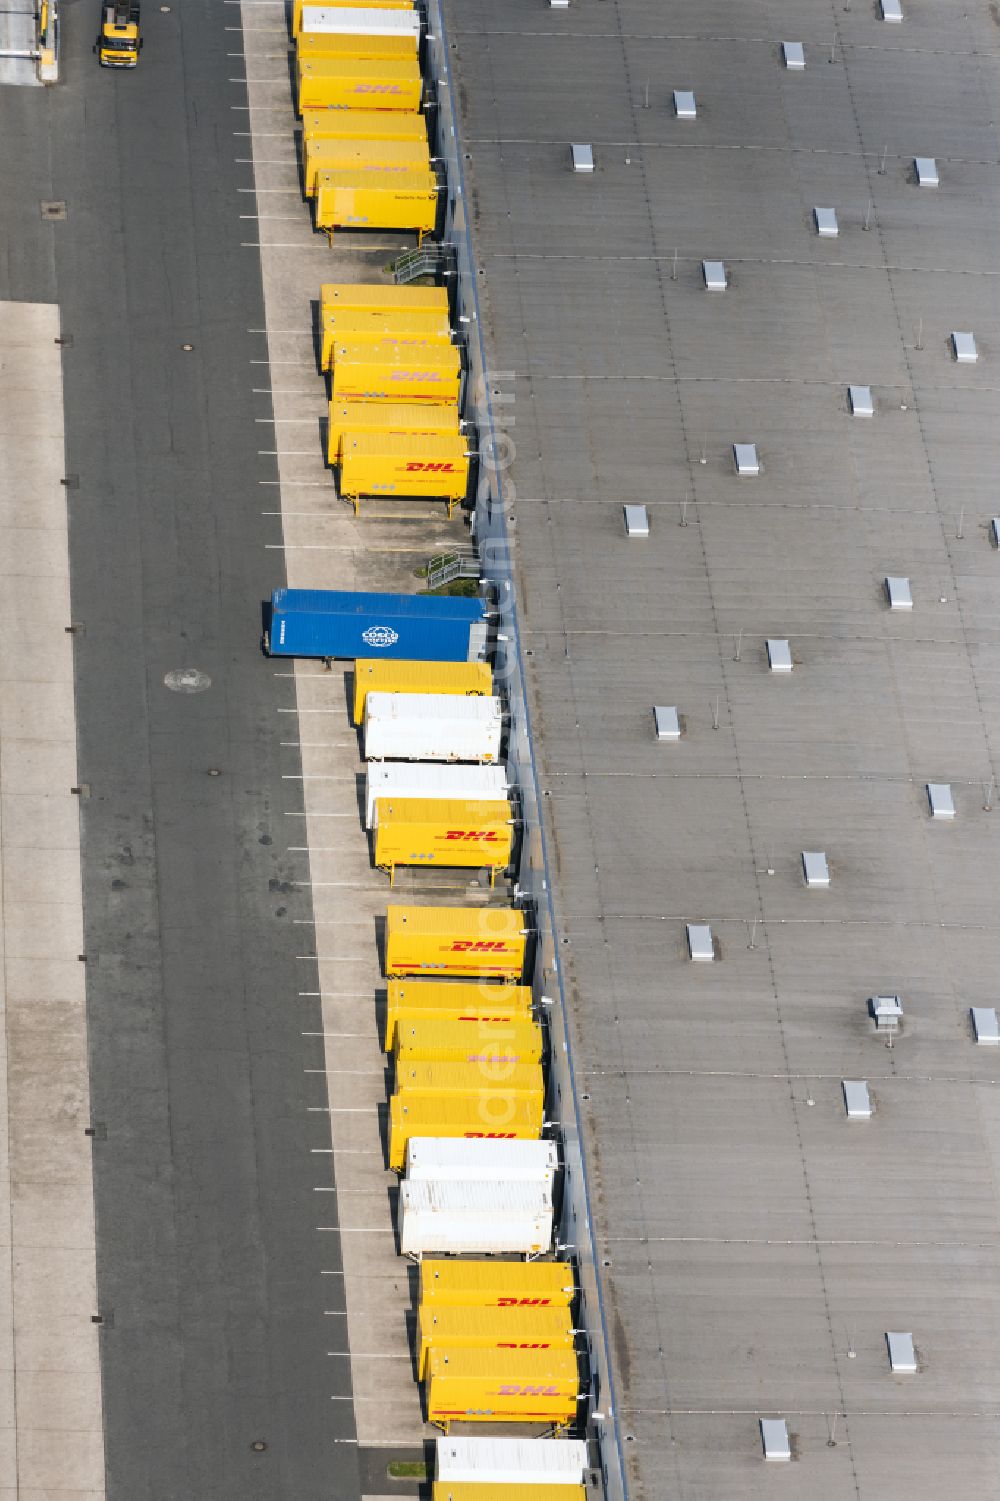 Aerial image Rodgau - Company grounds and facilities of DHL Paketzentrum in Rodgau in the state Hesse, Germany